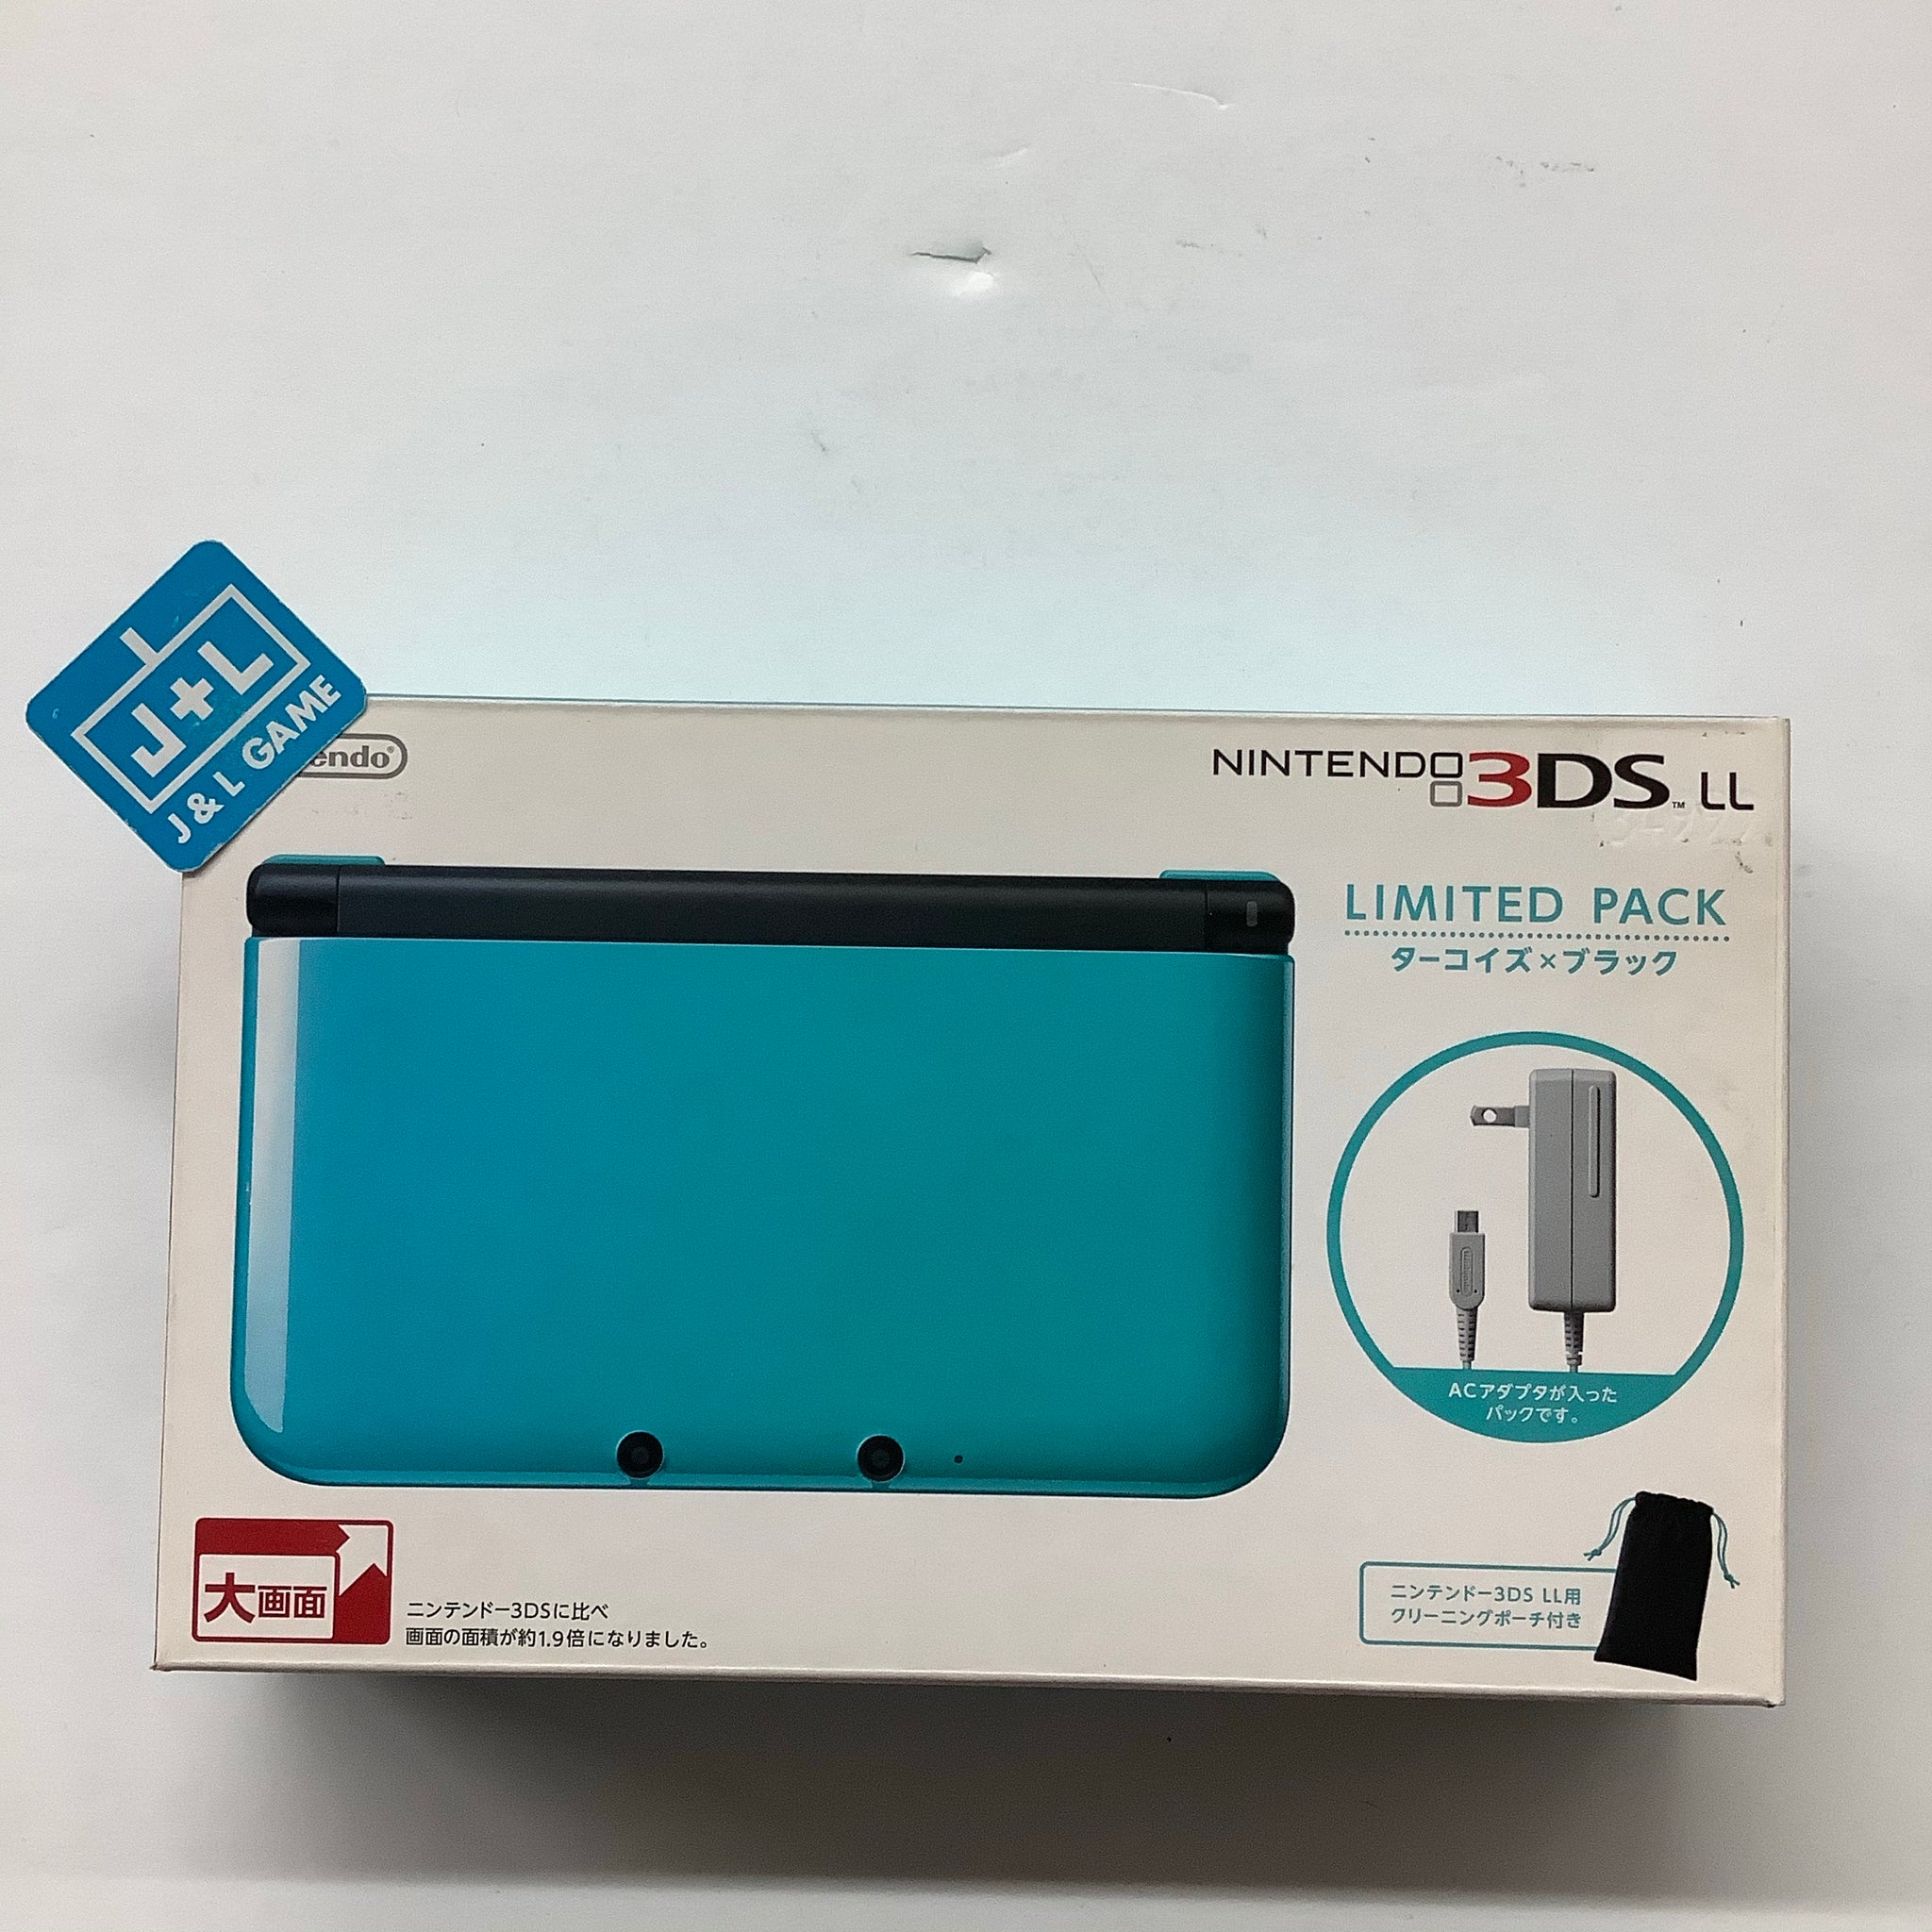 Nintendo 3DS LL Limited Pack Turquoise X Black   Nintendo 3DS